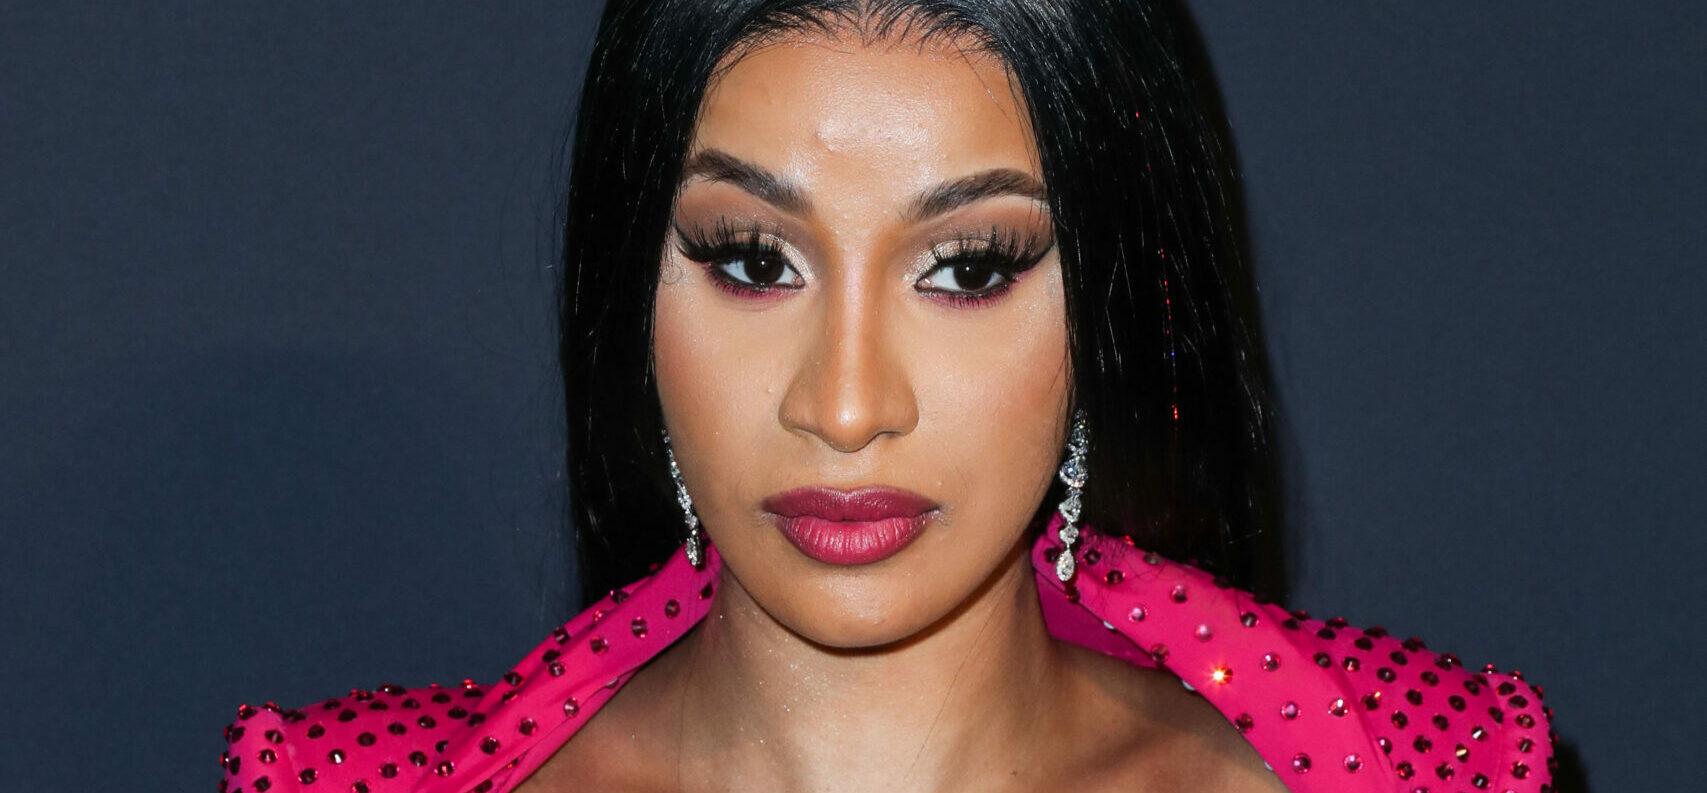 Cardi B Got Into An Emotionally Charged Feud With A Media Outlet: ‘I’m Not A Crazy Person!’